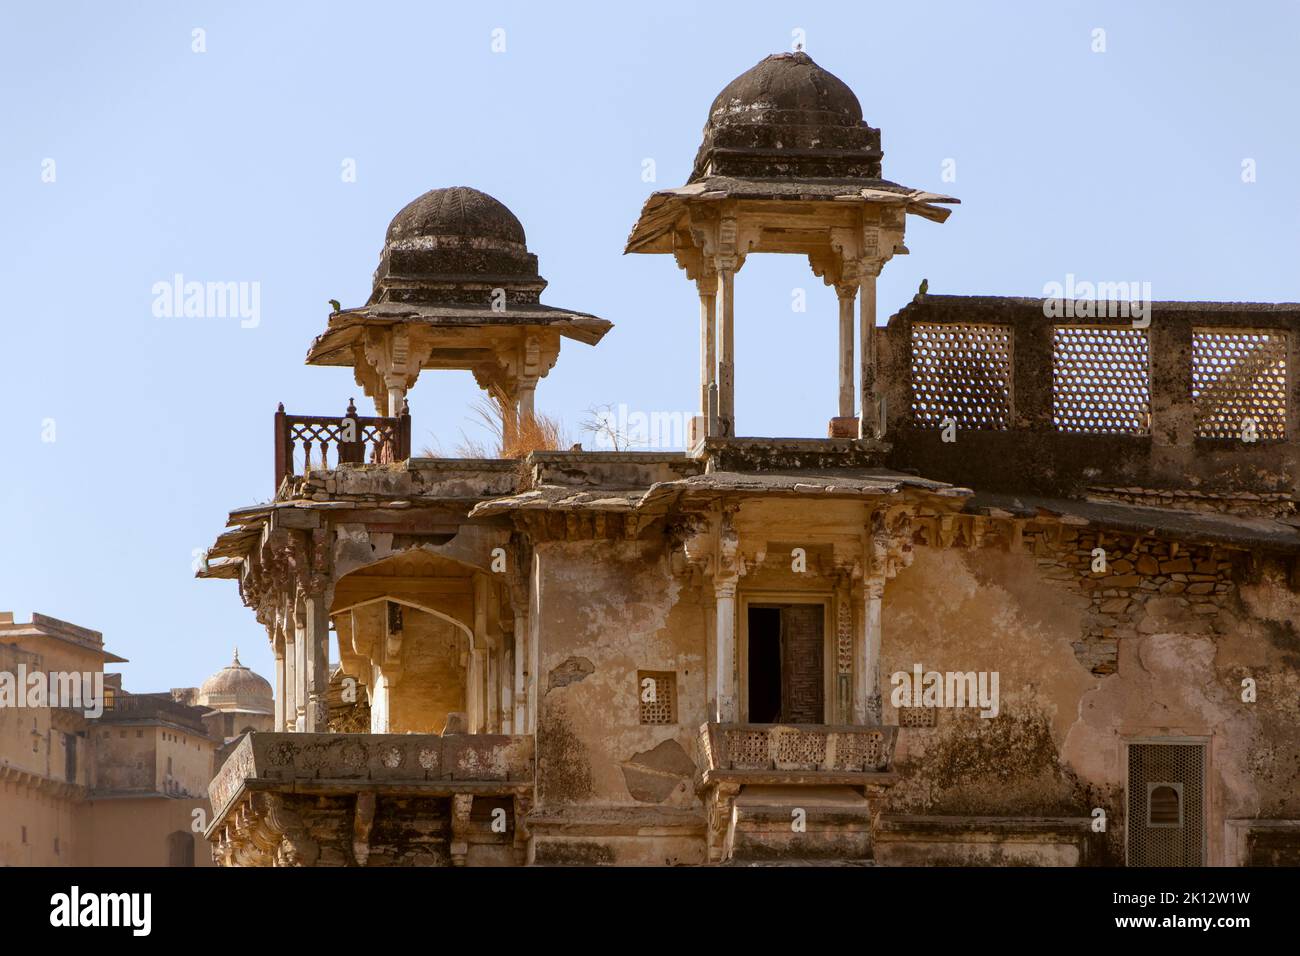 ruins of old traditional building in Amer city in India Stock Photo